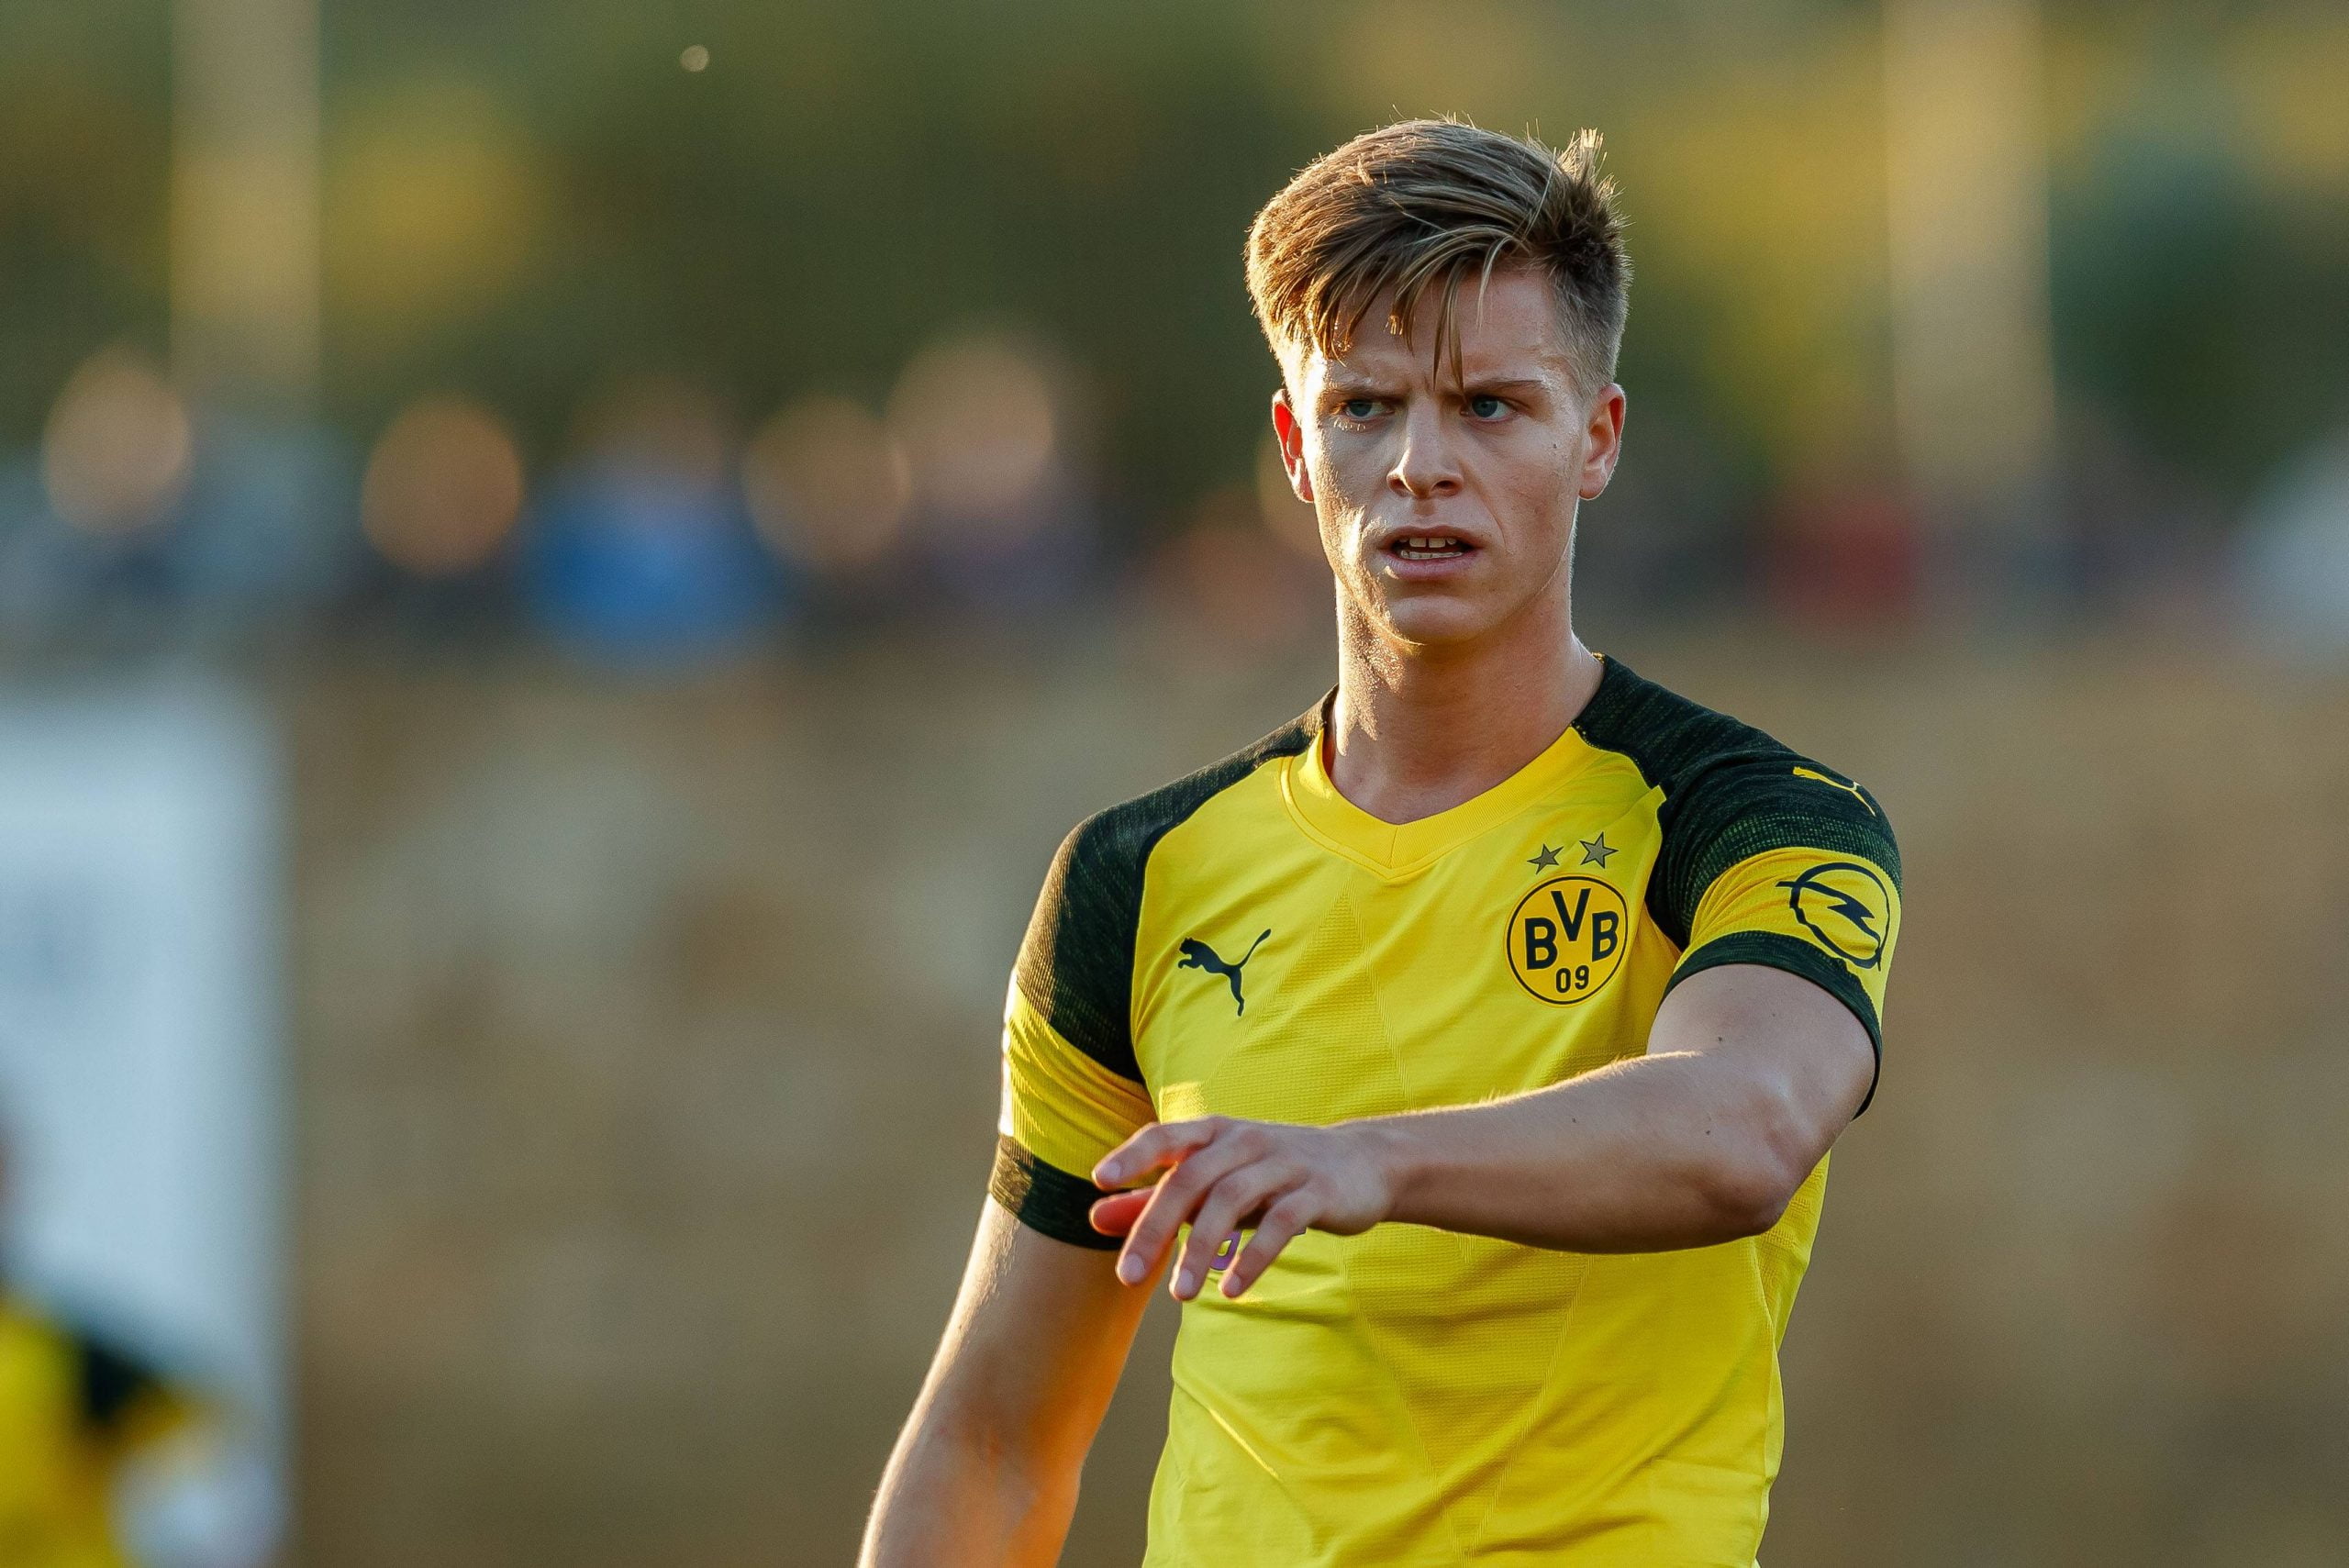 Borussia Dortmund have confirmed the departure of Dzenis Burnic - Good riddance for BVB